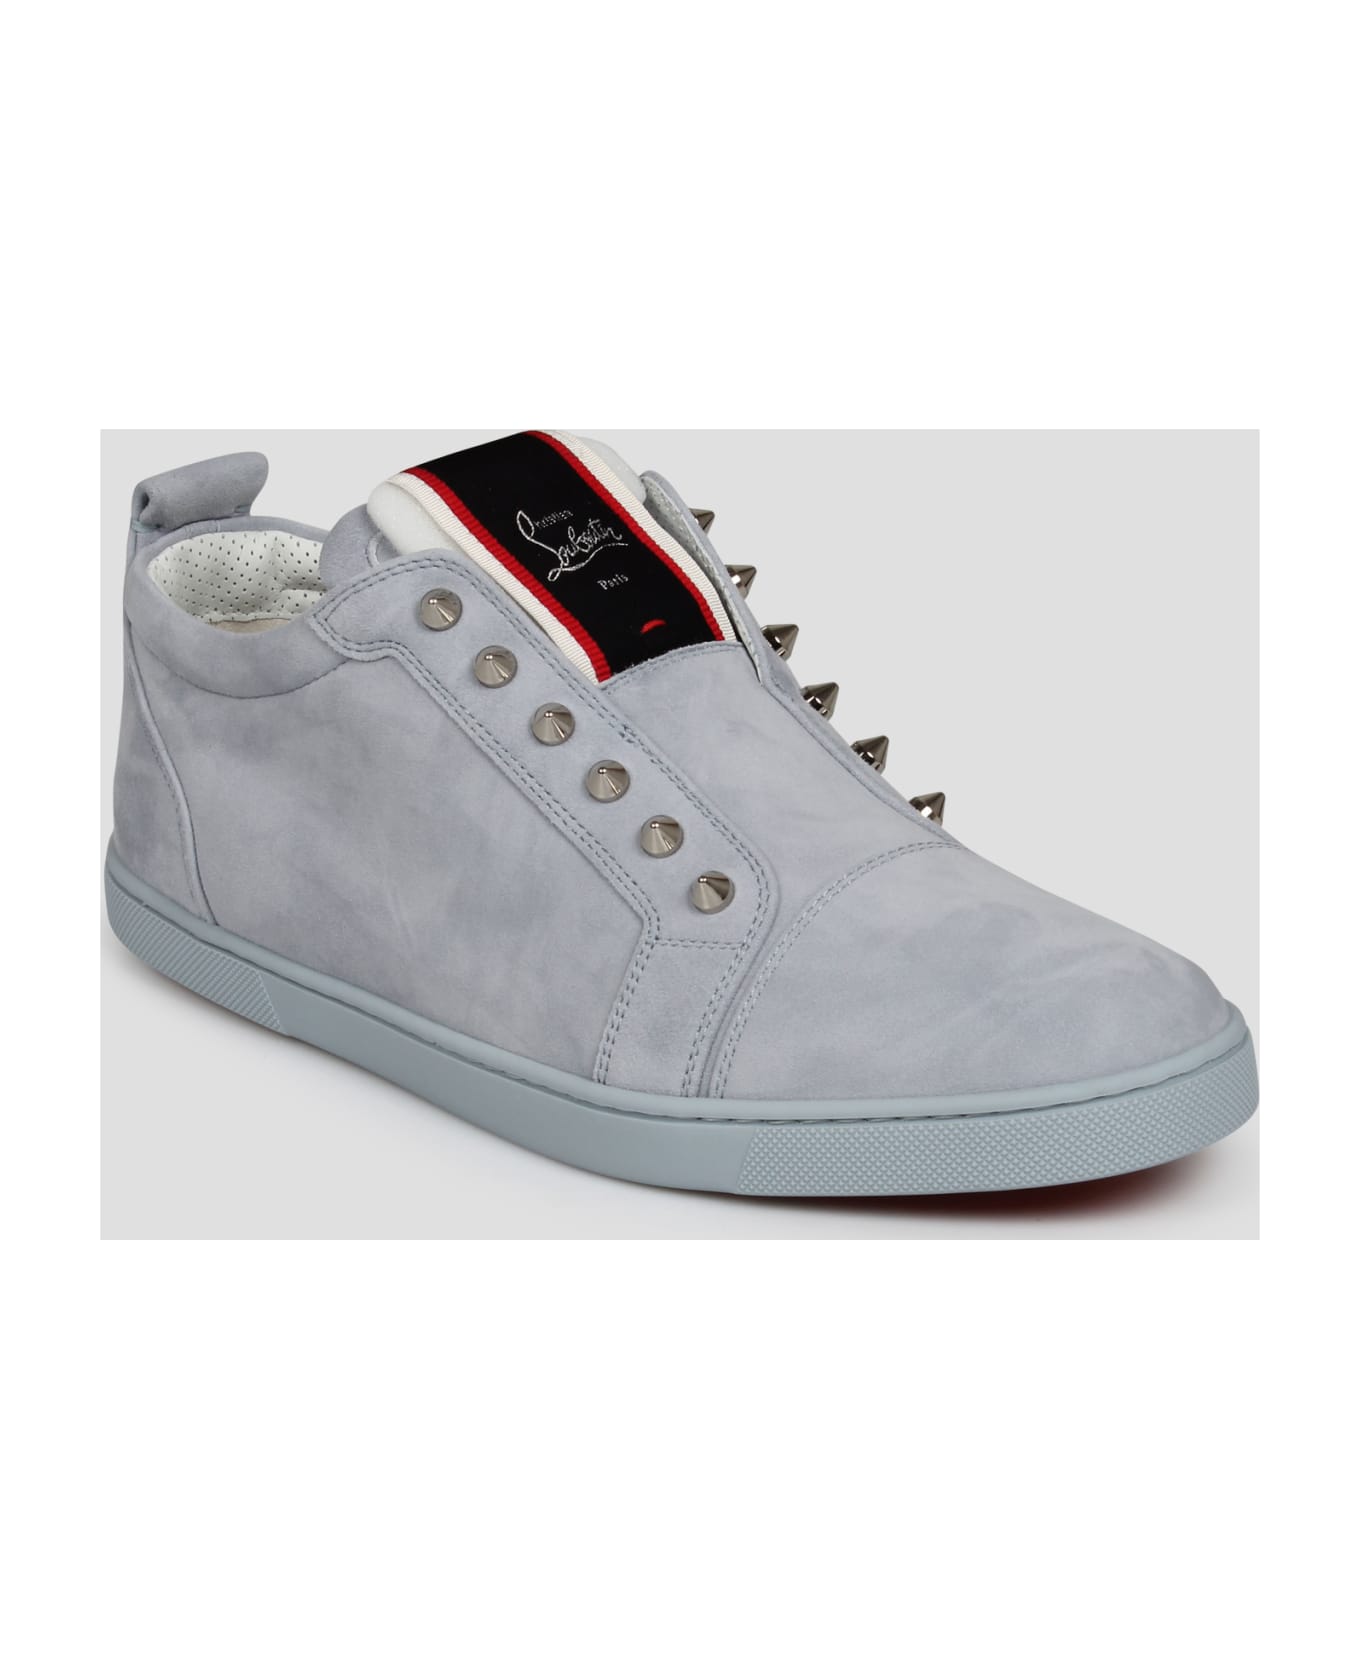 Christian Louboutin F.a.v Fique A Vontade Flat Sneakers - Blue